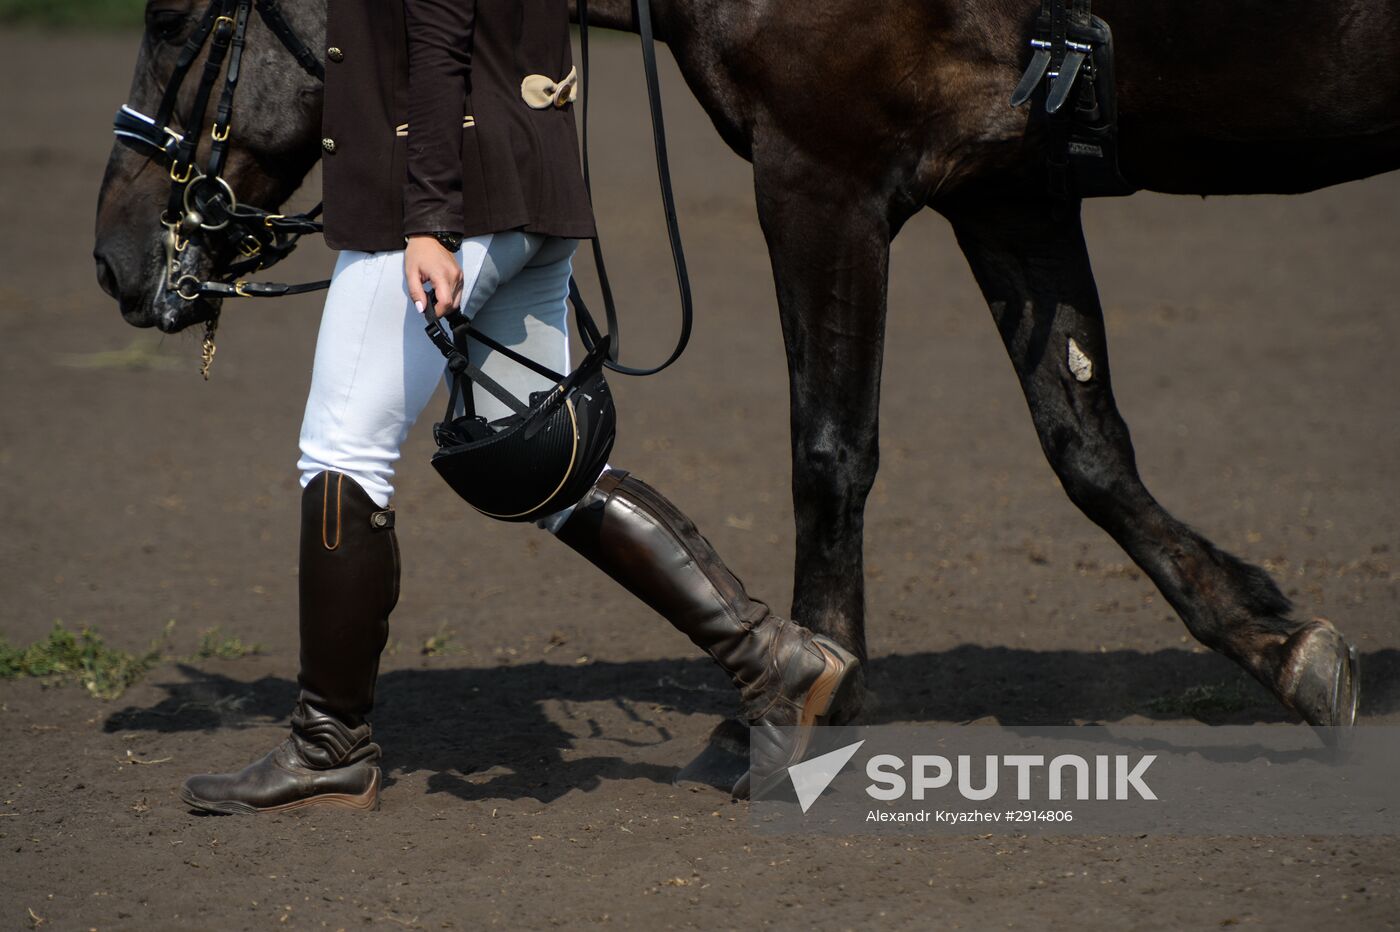 The Novosibirsk Region Show Jumping and Dressage Championships